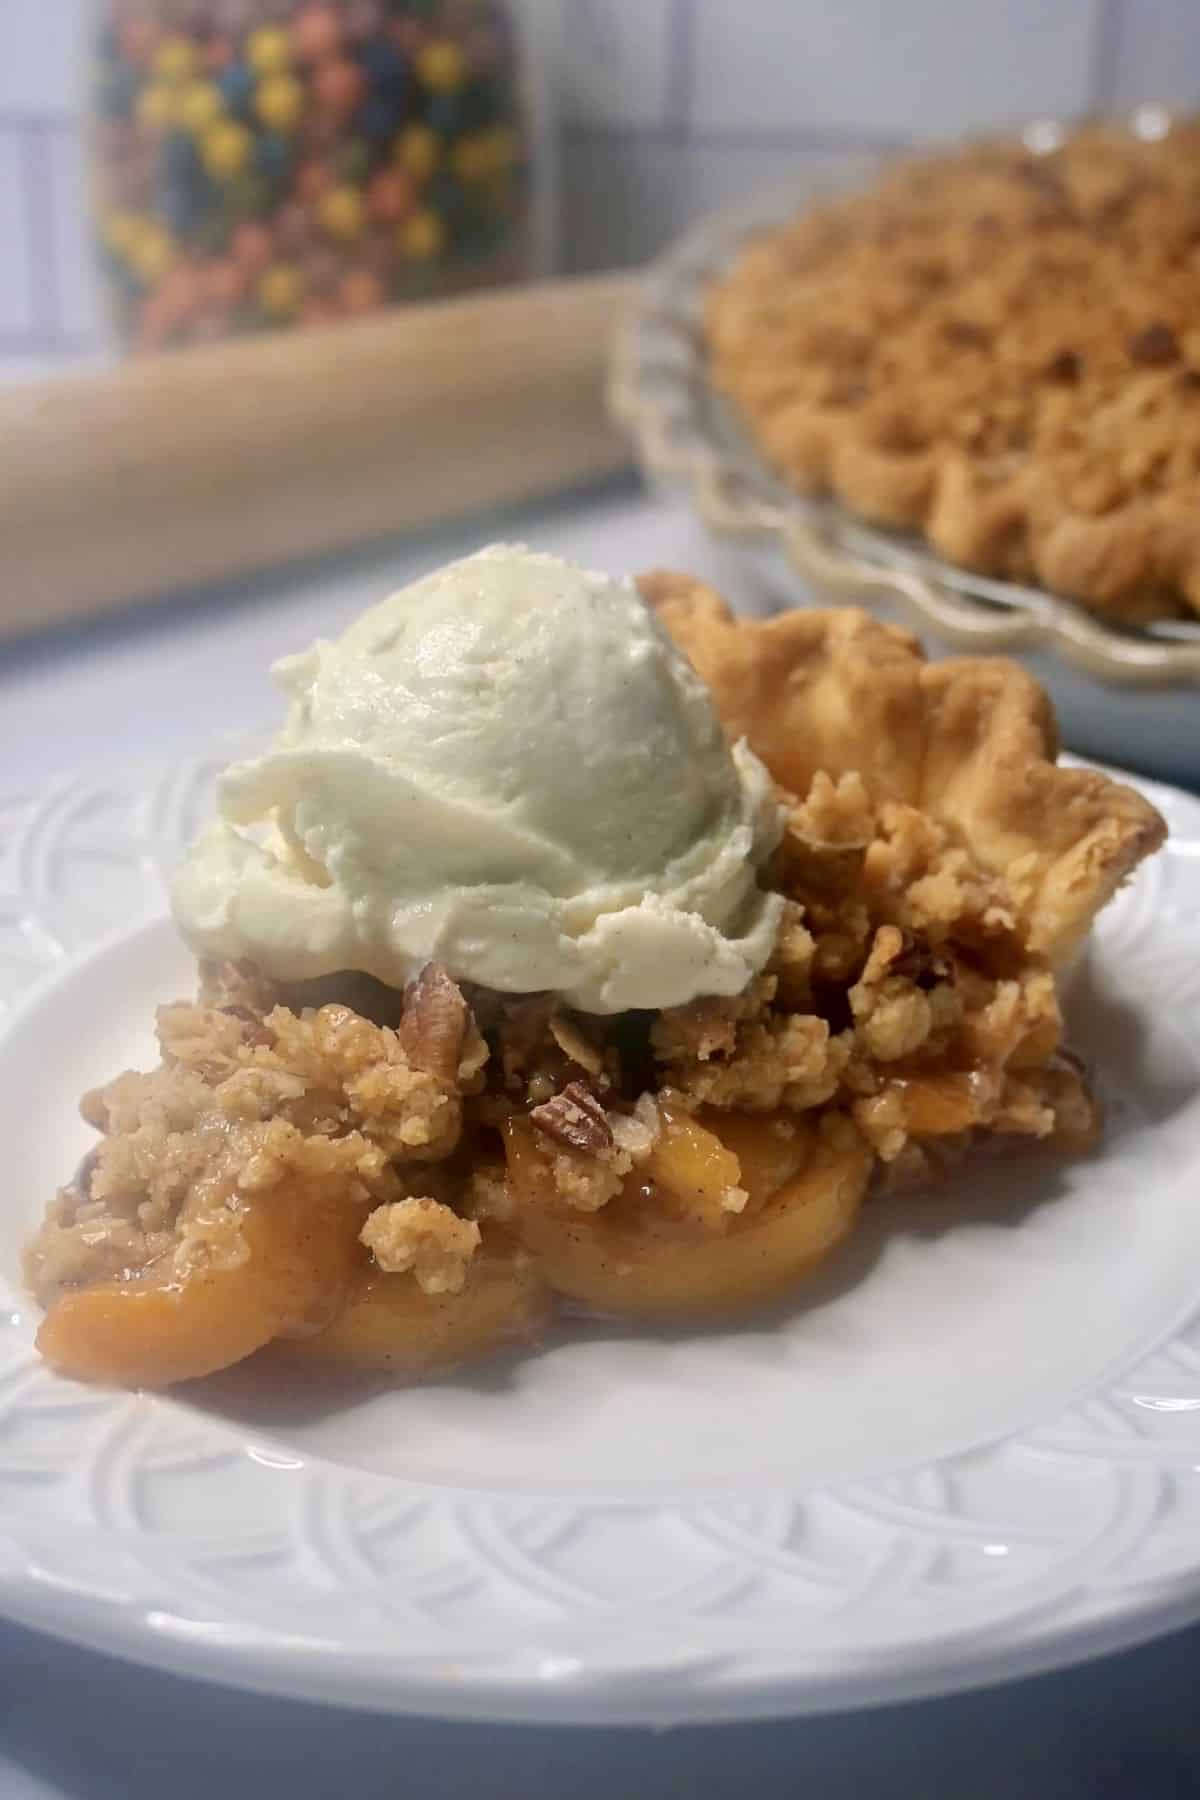 A slice of peach crumble pie on a plate.